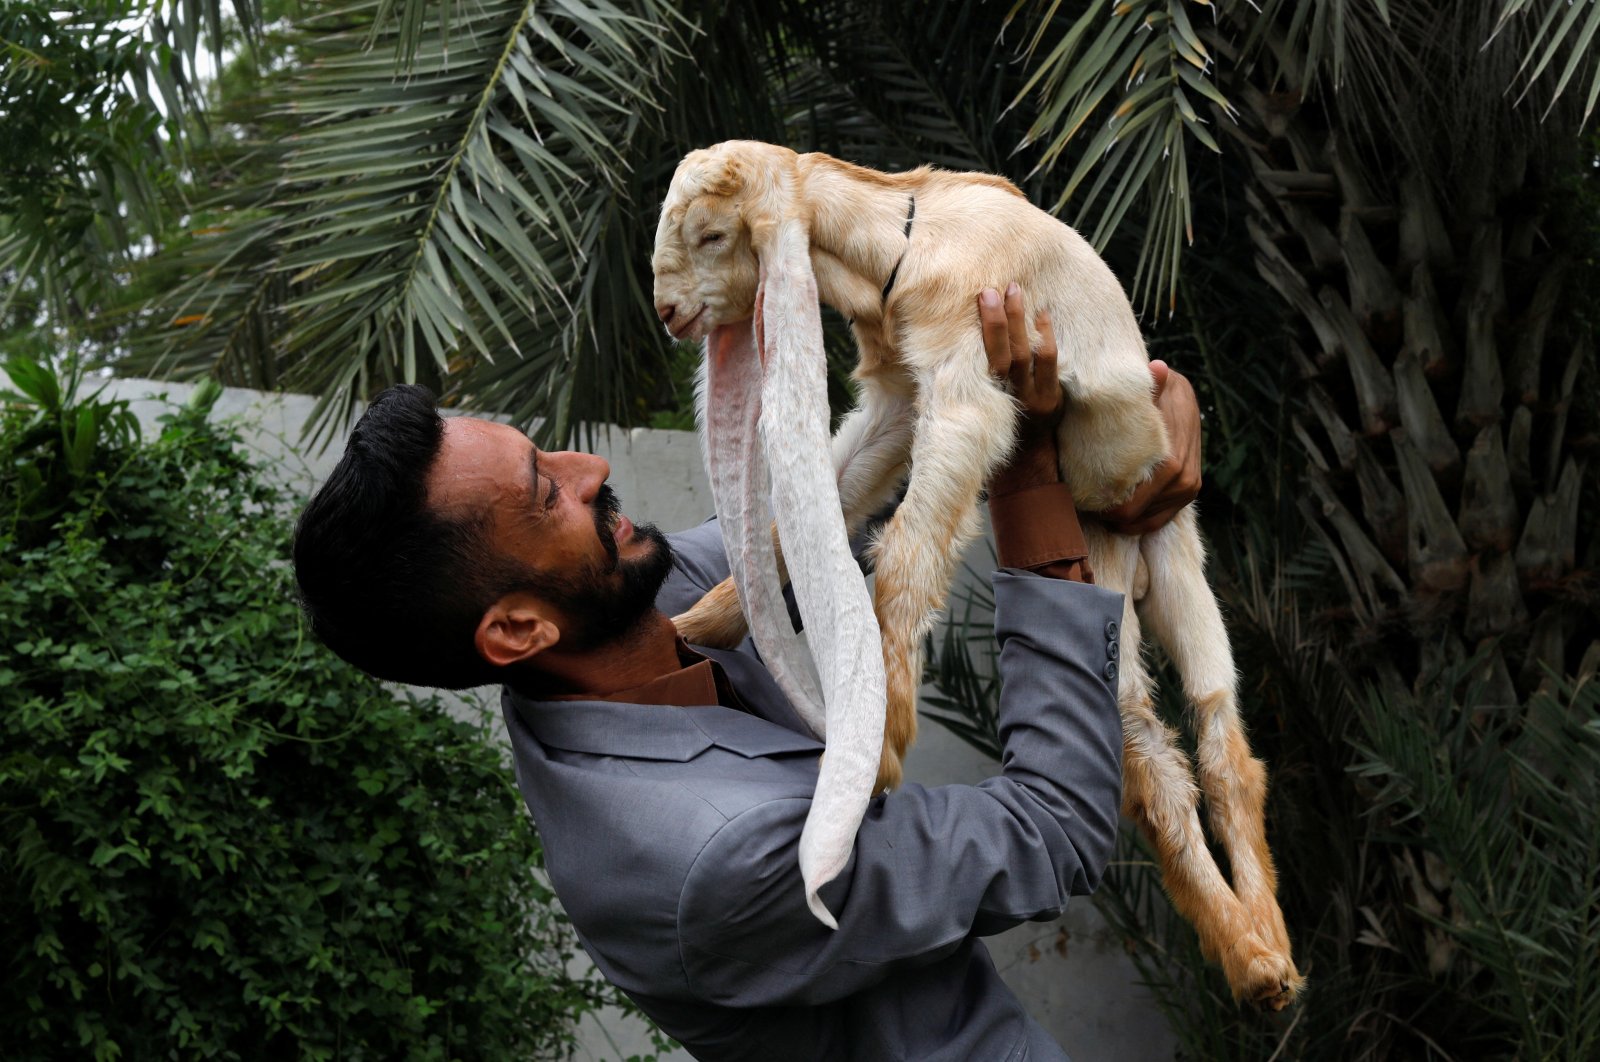 Simba, a 1 month and 4 days old kid goat with 22-inch long ears, is held by his owner in Karachi, Pakistan, July 8, 2022. (Reuters Photo)